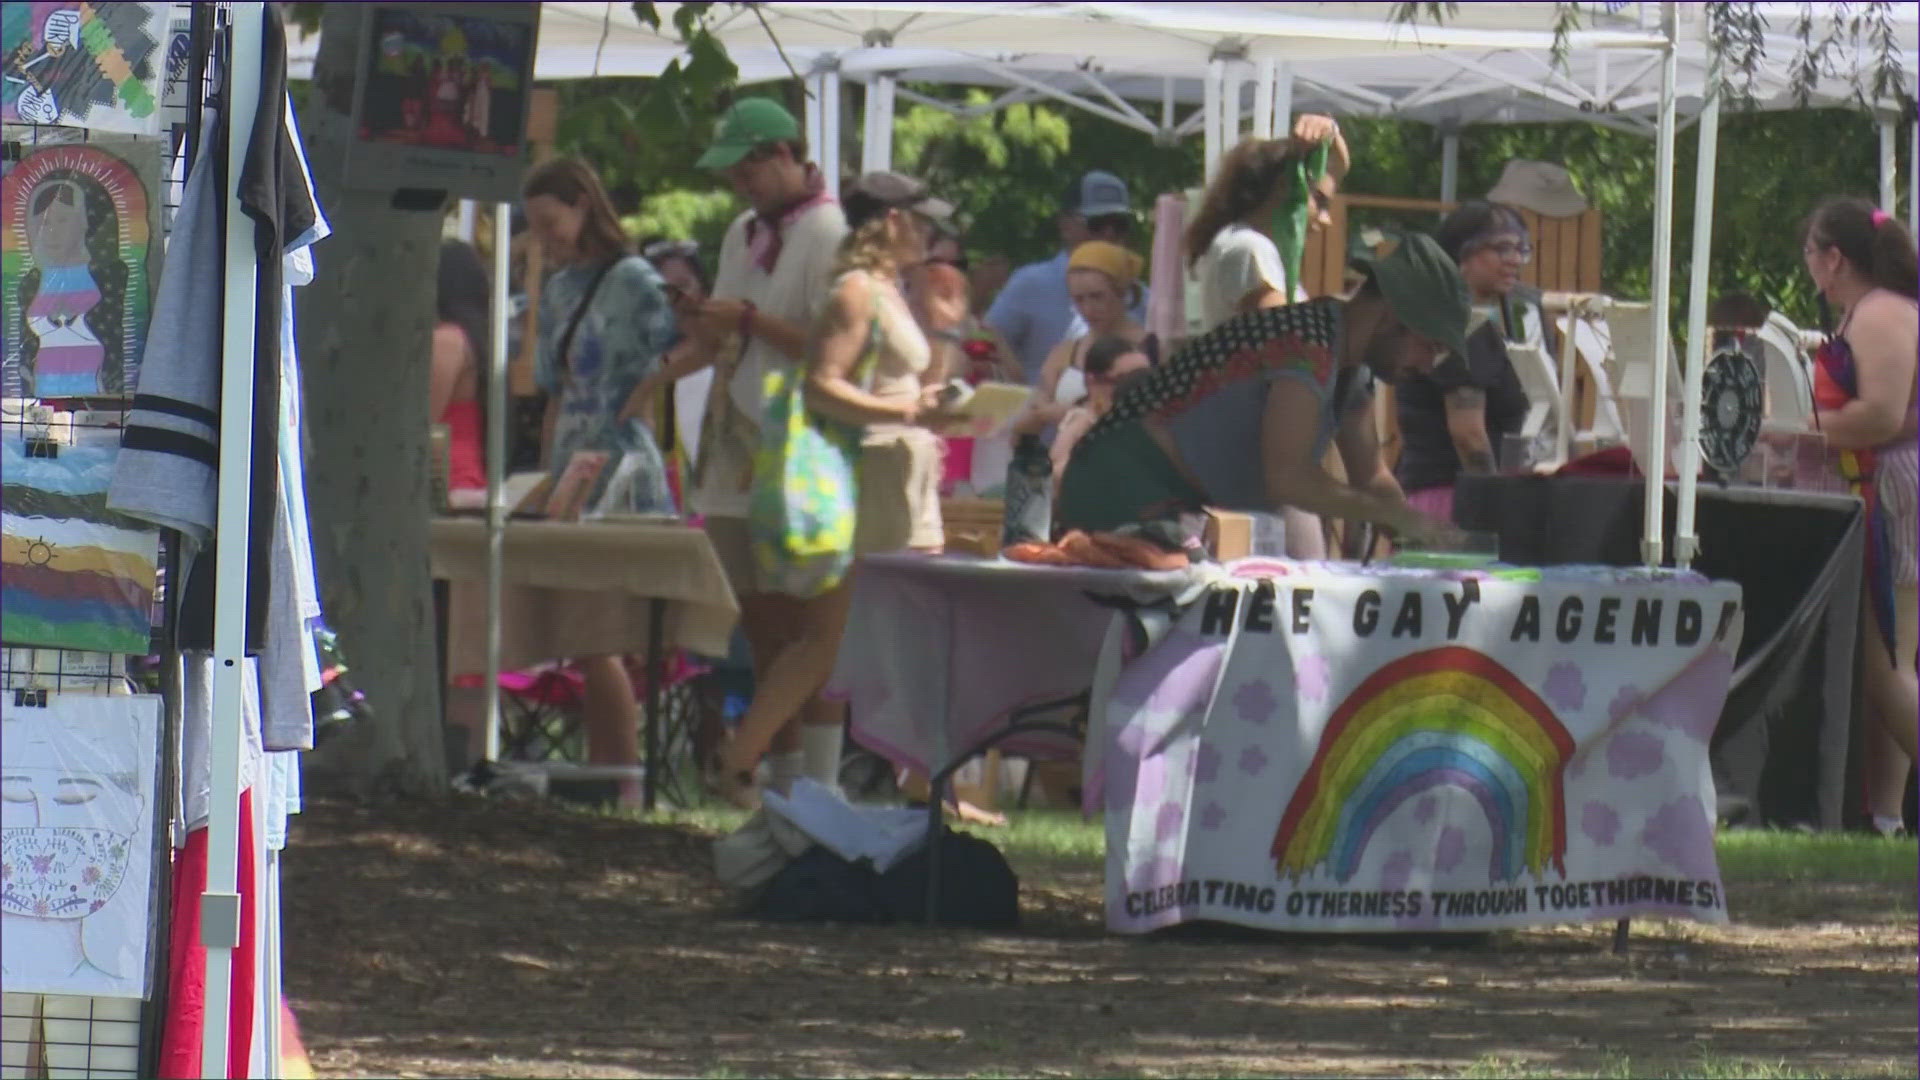 Hundreds of people turned up for a Pride event in Austin at Pease Park. The free event featured local vendors and live music.